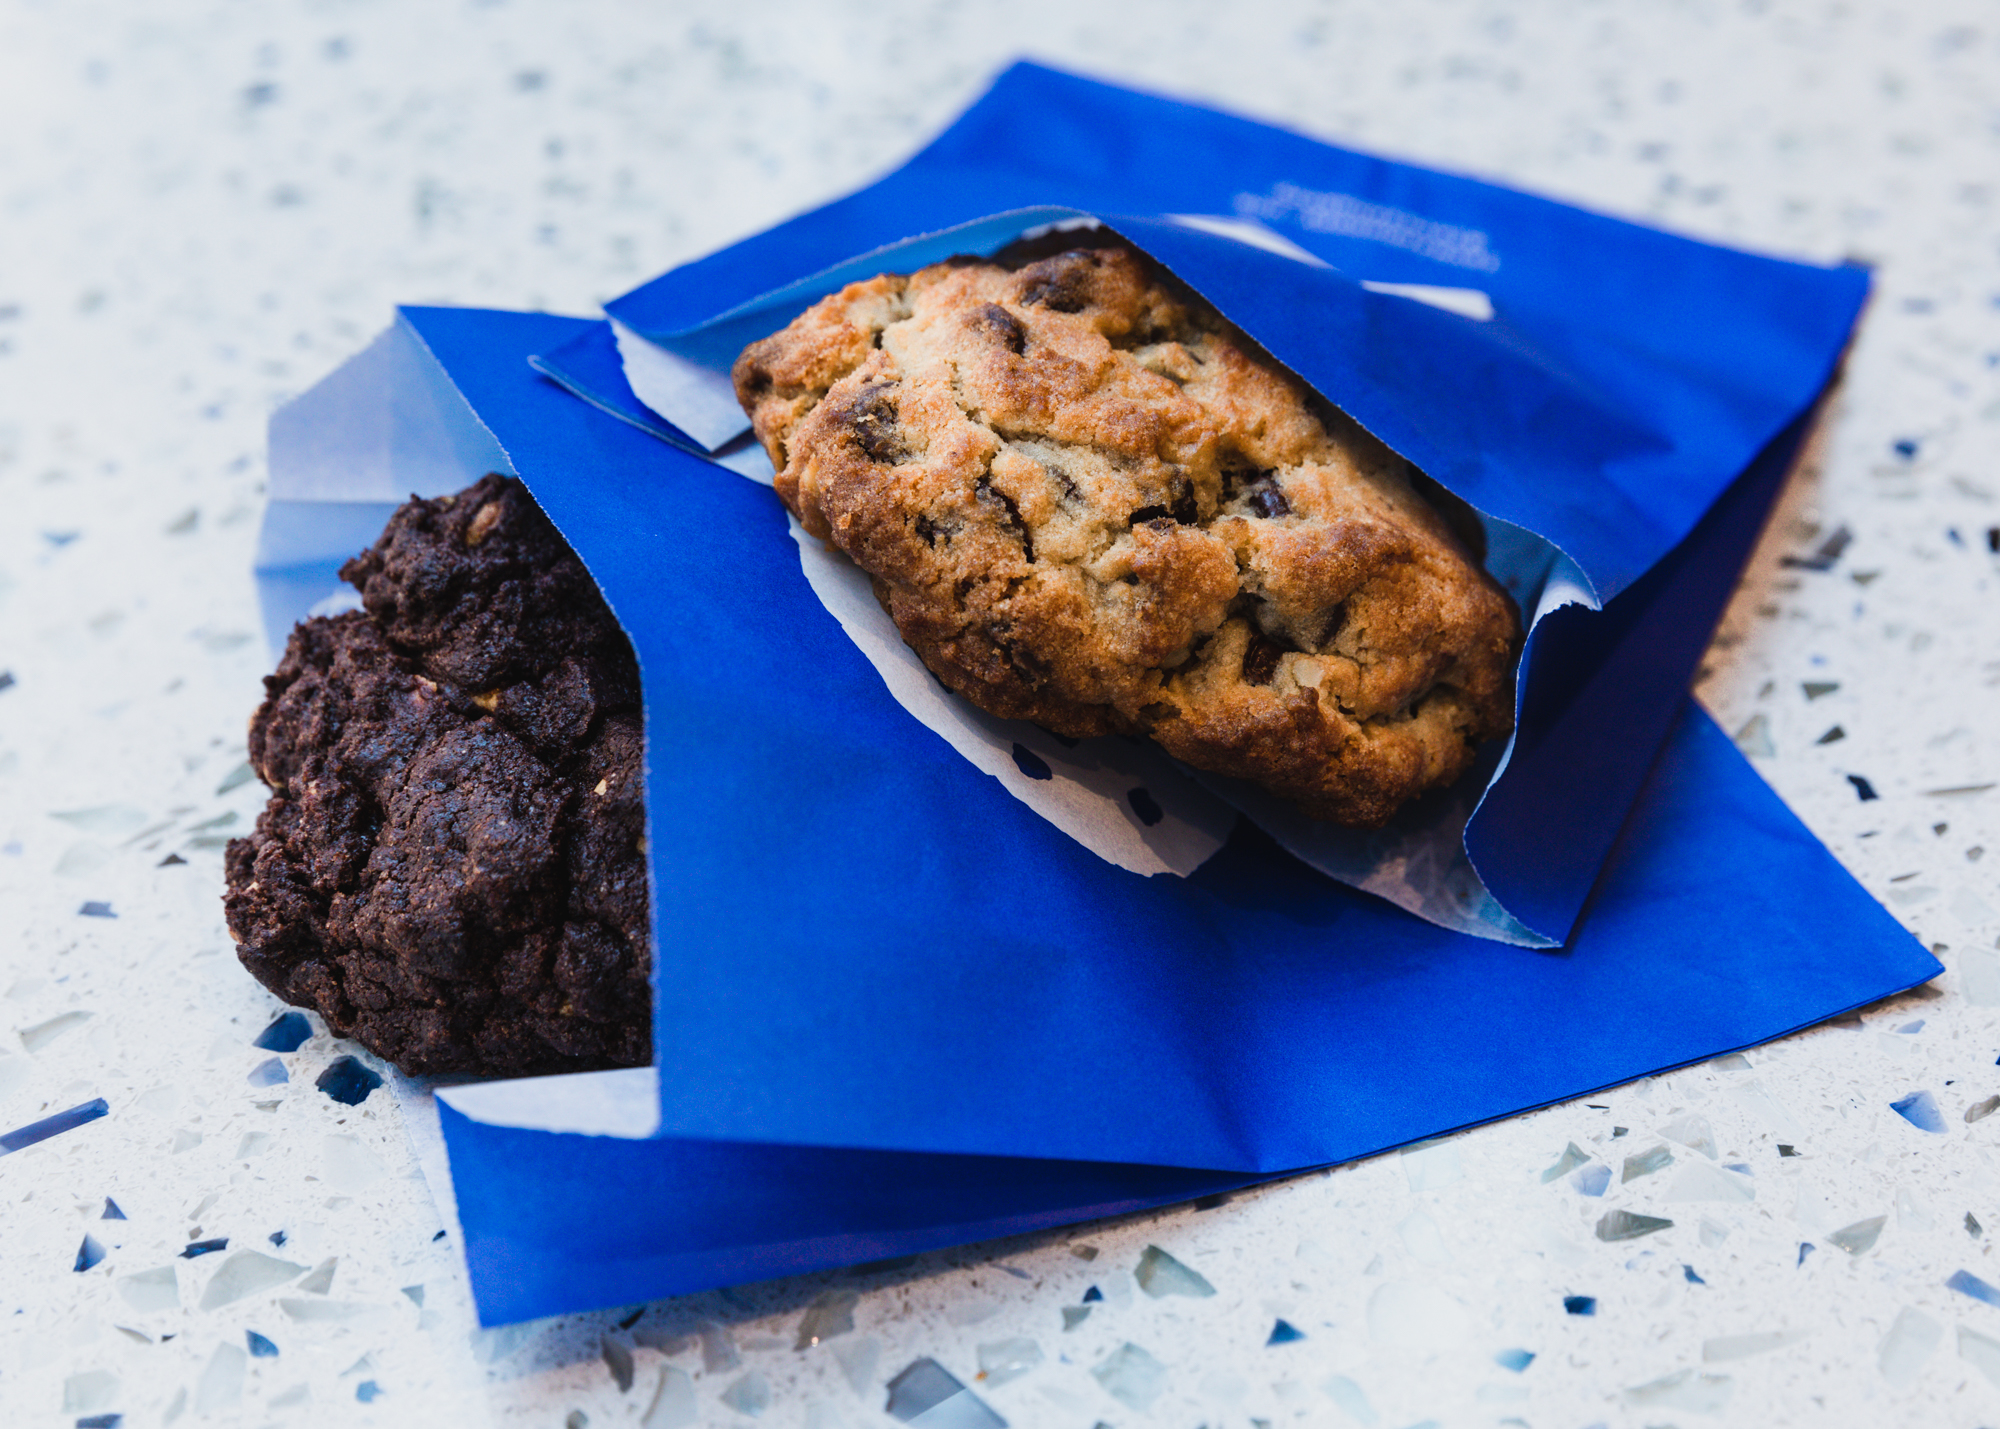 Two cookies in blue paper bags on a speckled countertop.